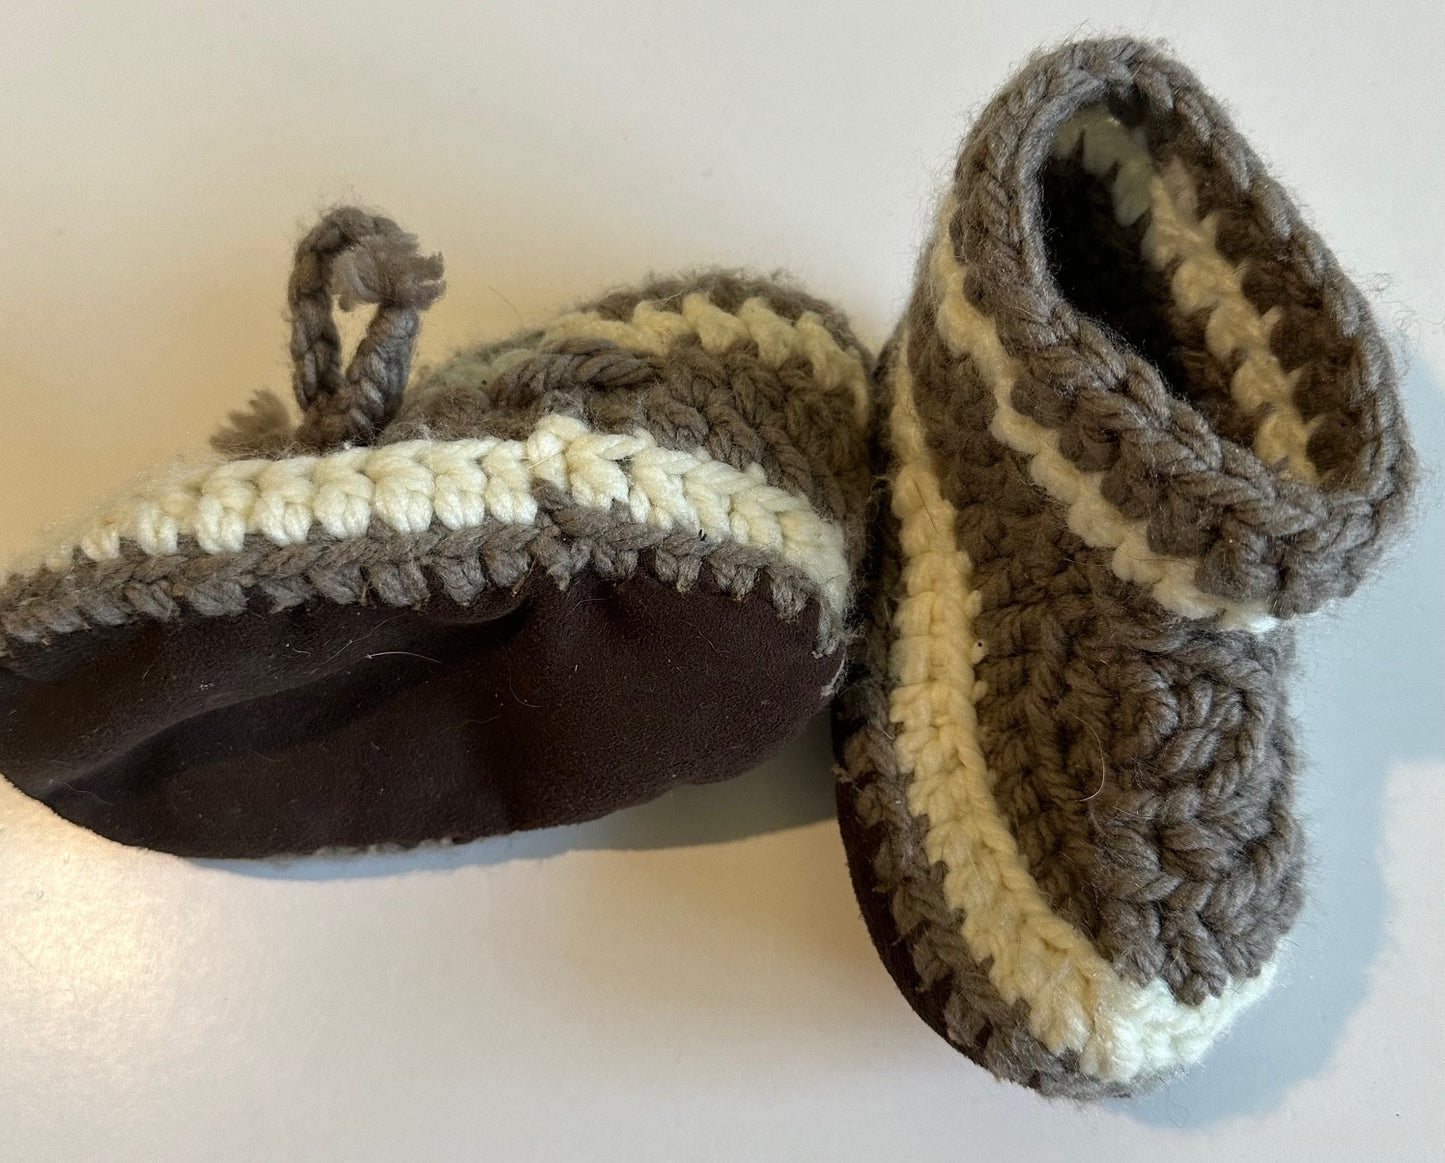 Unknown Brand, Brown and Cream Knitted Booties - Size 8T